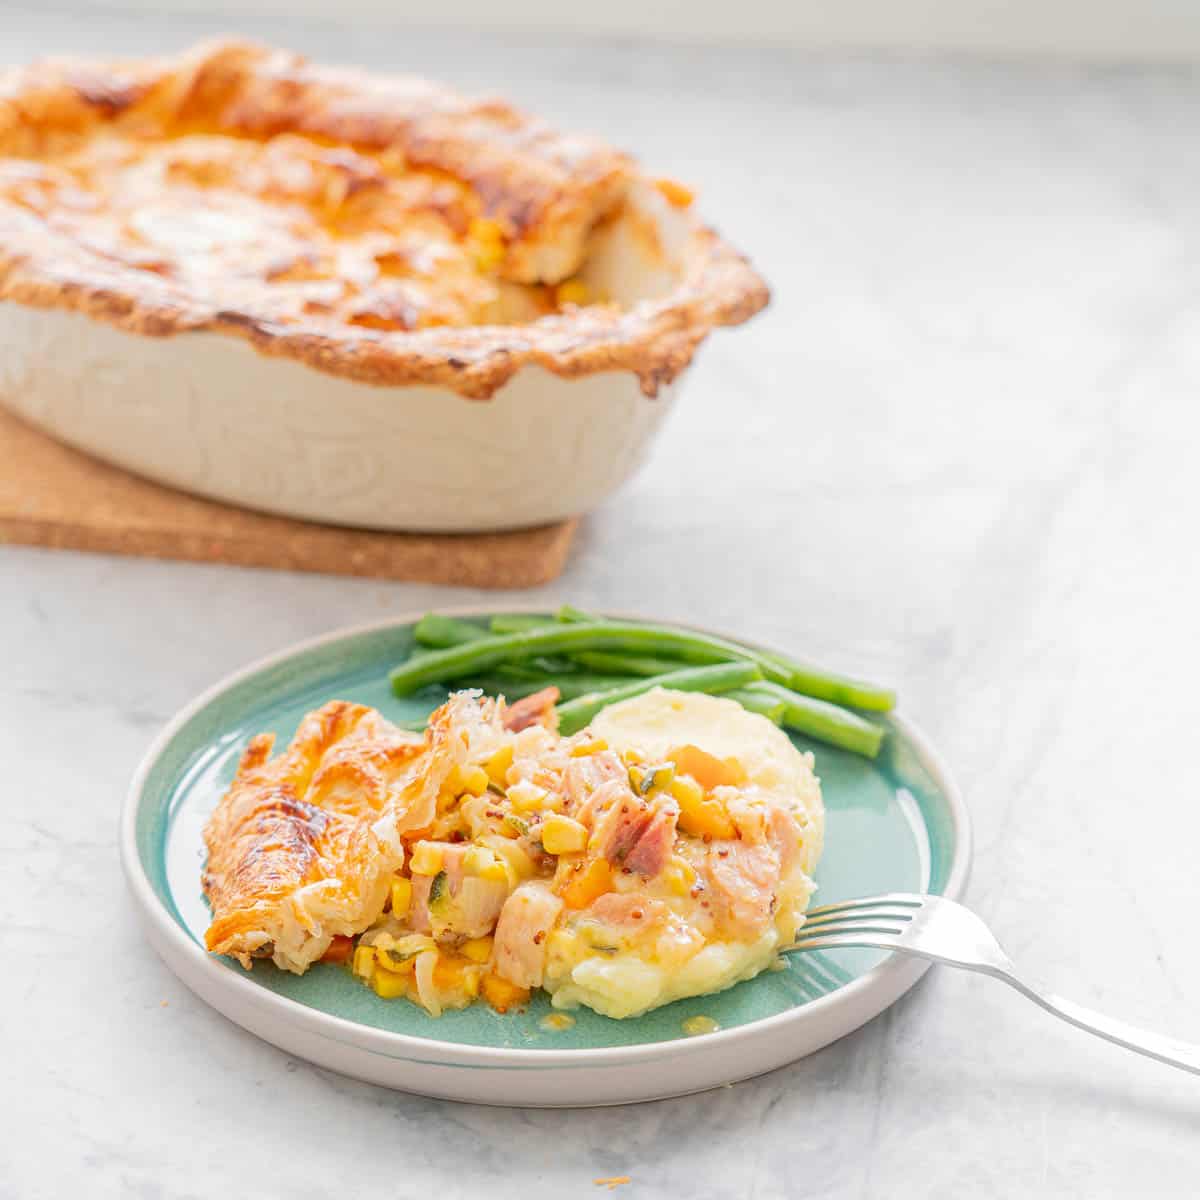 Golden brown baked ham pot pie resting on a chopping board, behind a serving with a side of beans on a teal coloured ceramic plate and a fork resting on the side